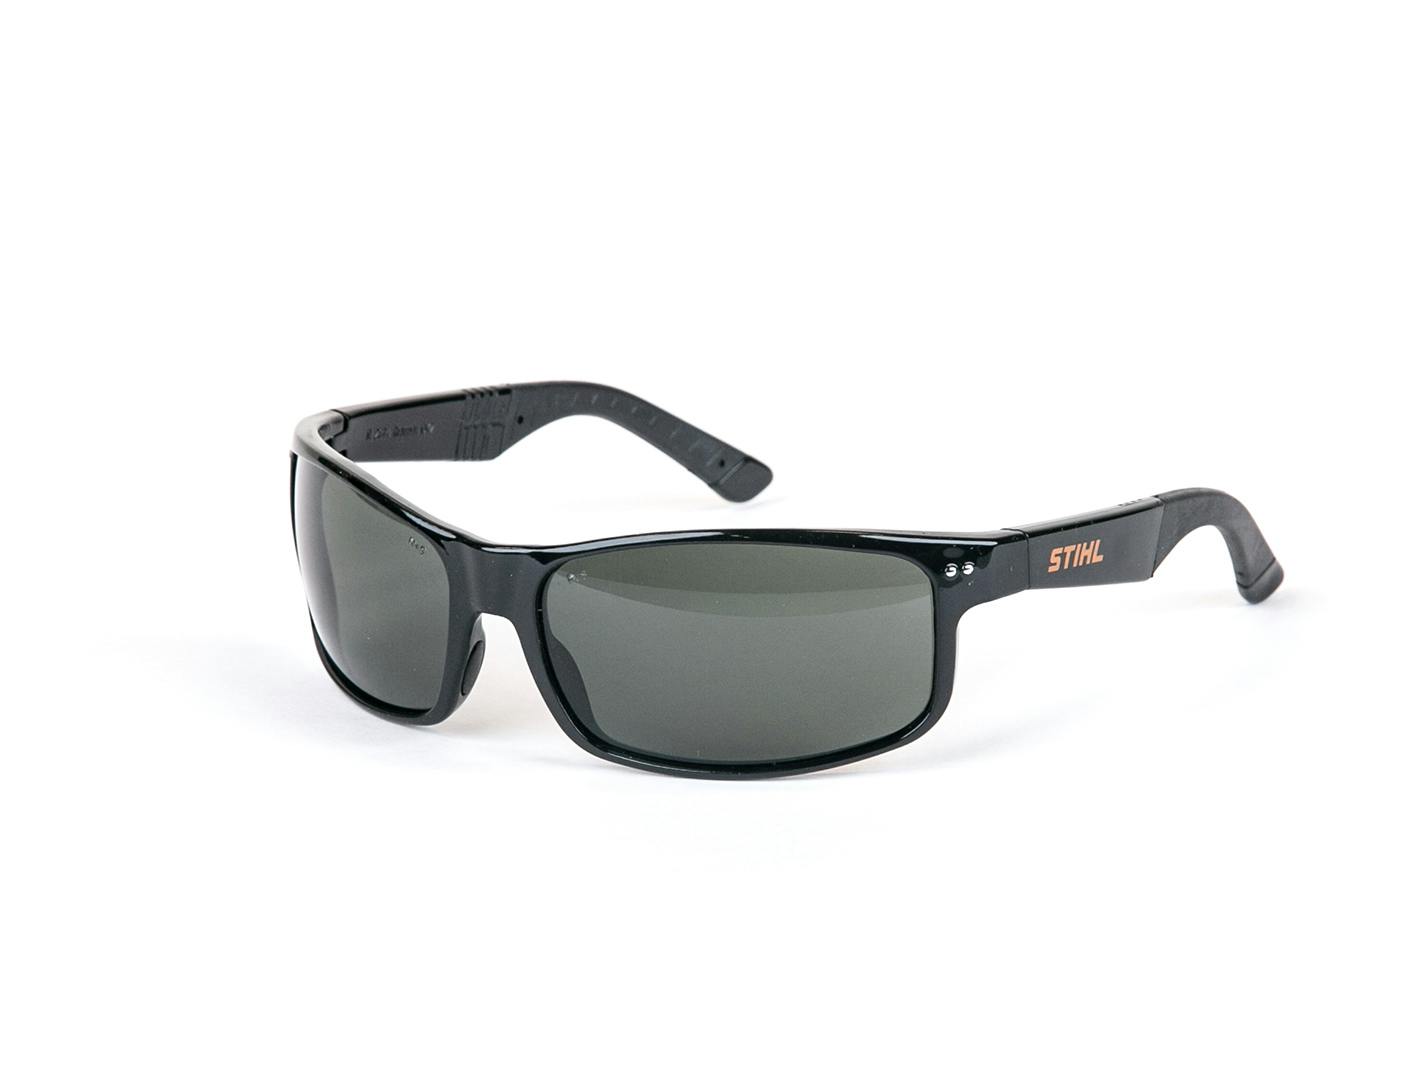 Polarized Classic Vision Glasses, Protective & Work Wear